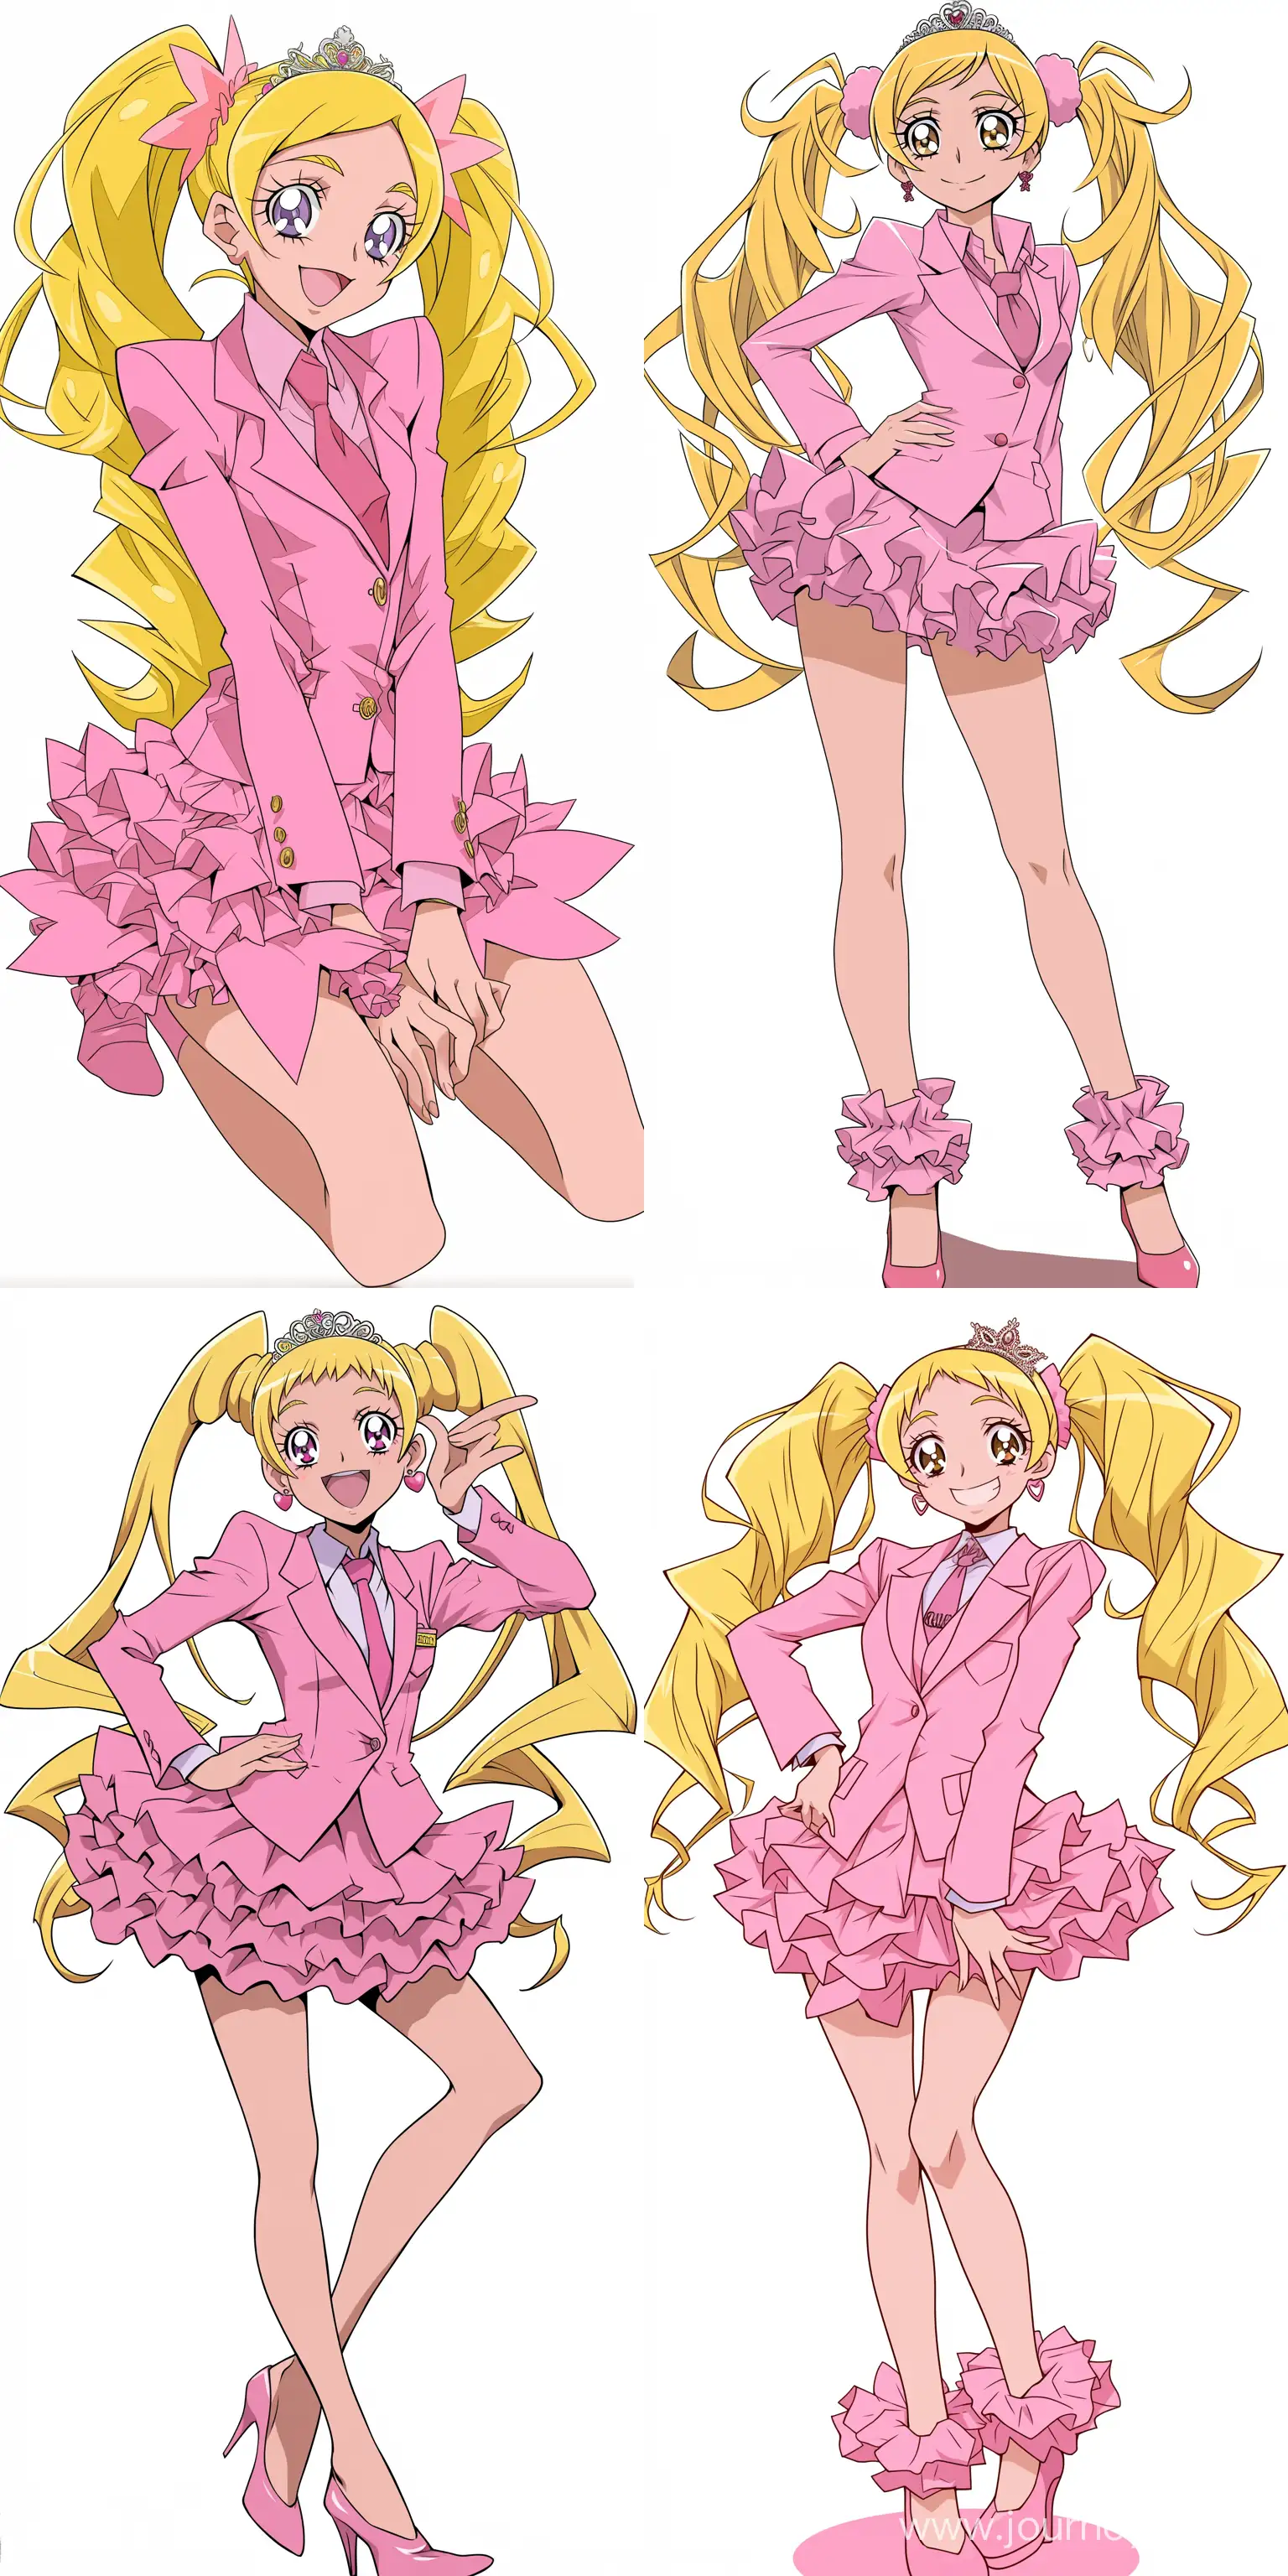 office lady magical girl, tiara, ornate outfit, character design, full body, pink gucci business suit, frilly skirt, blonde hair, twin tails, precure-style --niji 6 --sref https://s.mj.run/Jj5GNbiNE-4 --ar 1:2